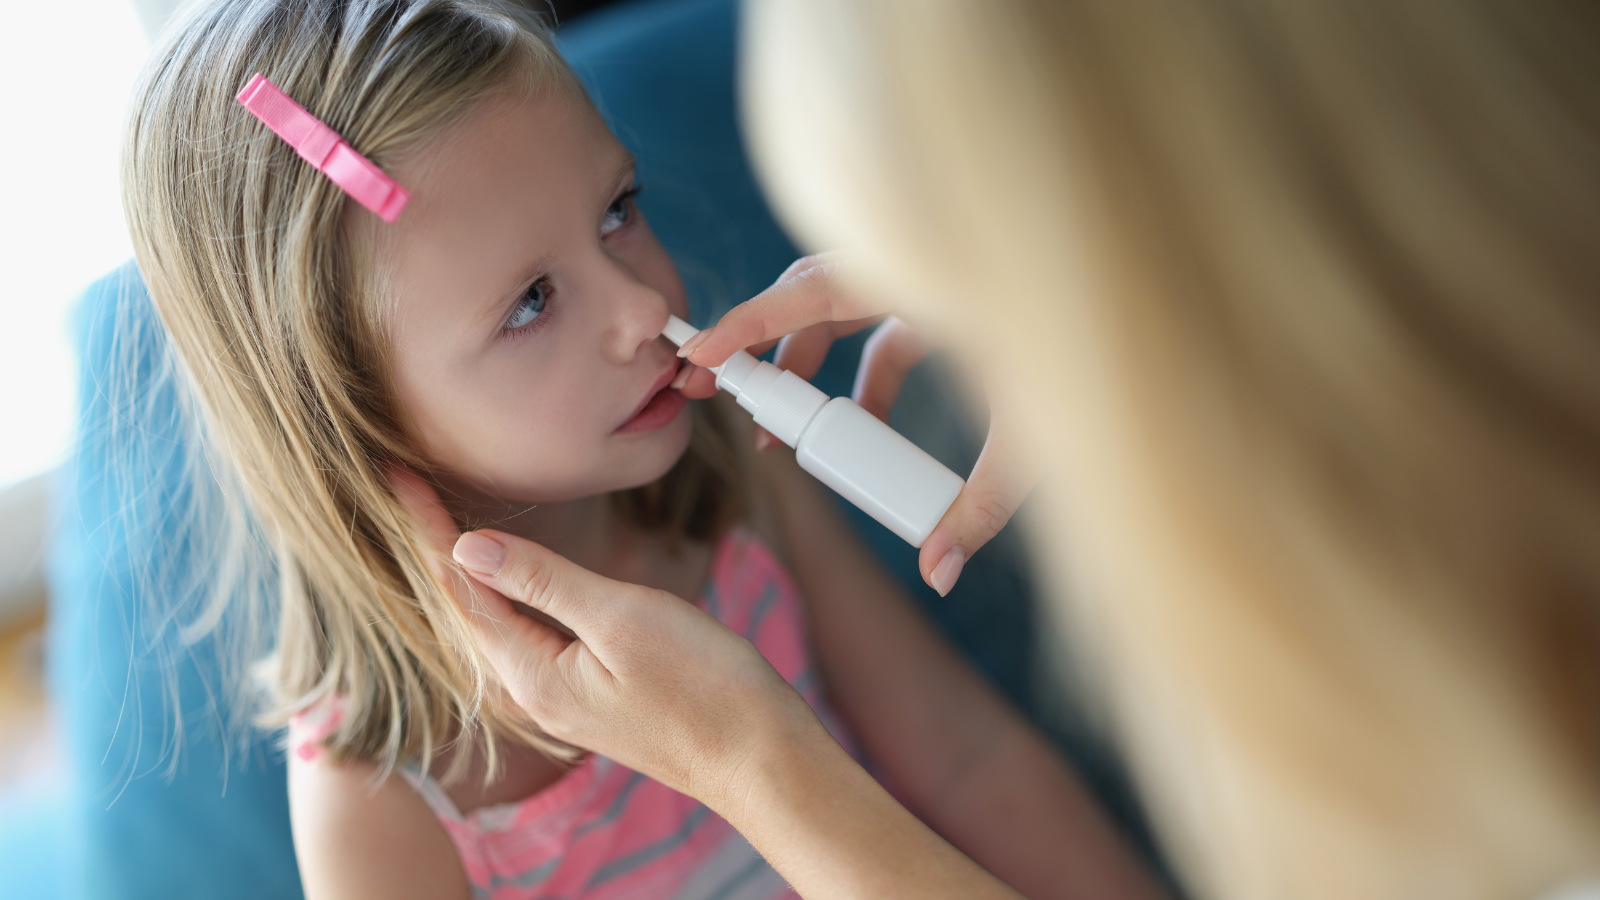 Visual of a young child having a flu nasal spray.